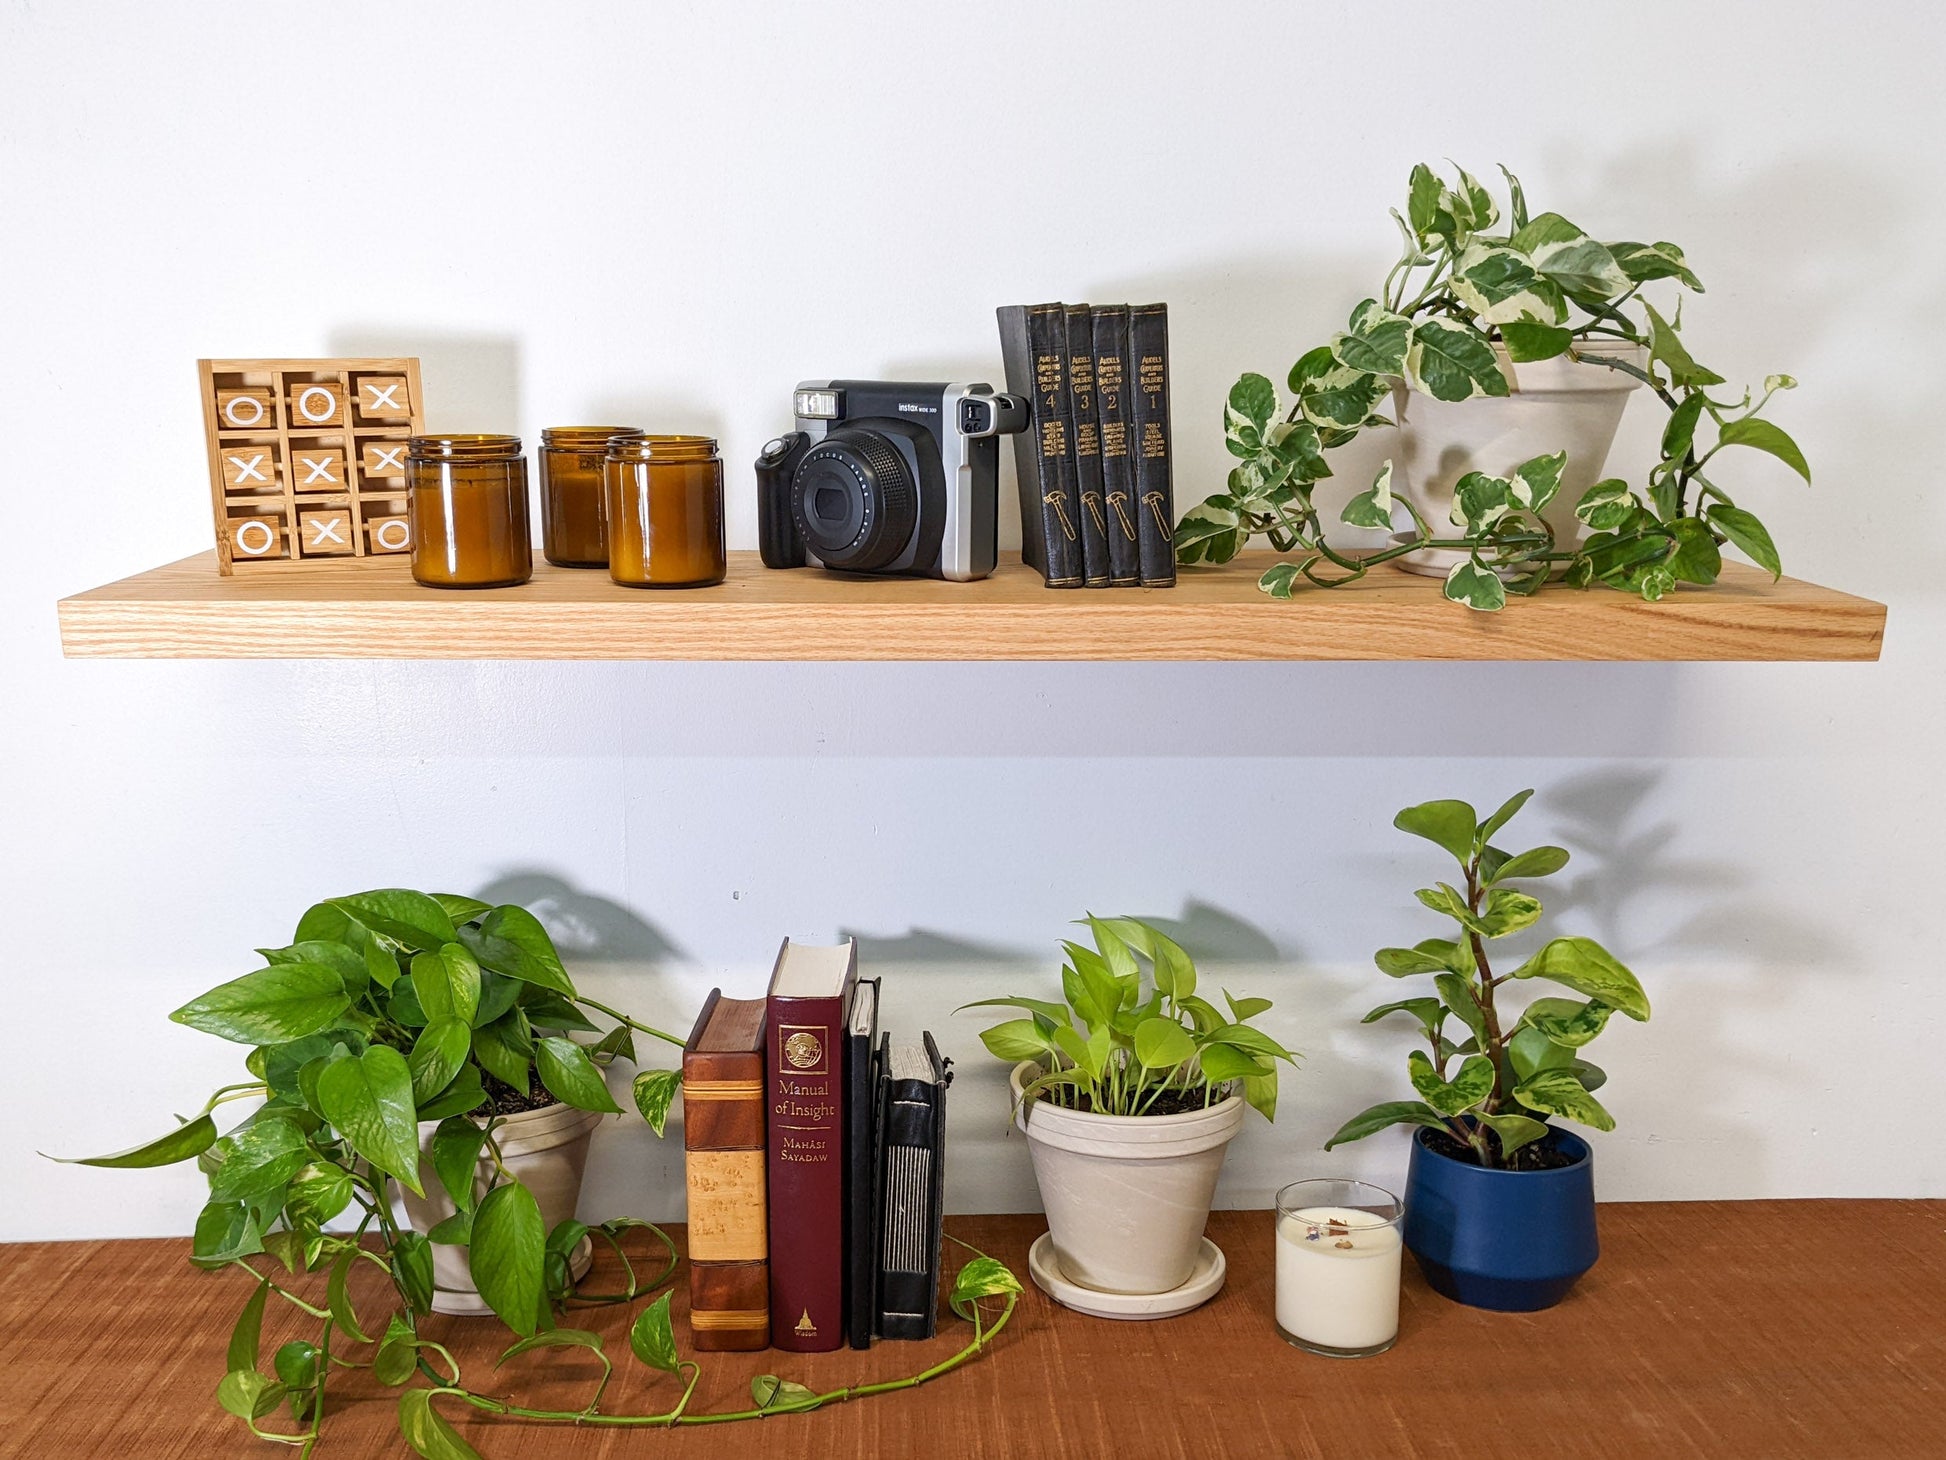 Long floating shelves in oak and mahogany display a collection of plants, books, three candles, a decorative tic-tac-toe game, and a camera.